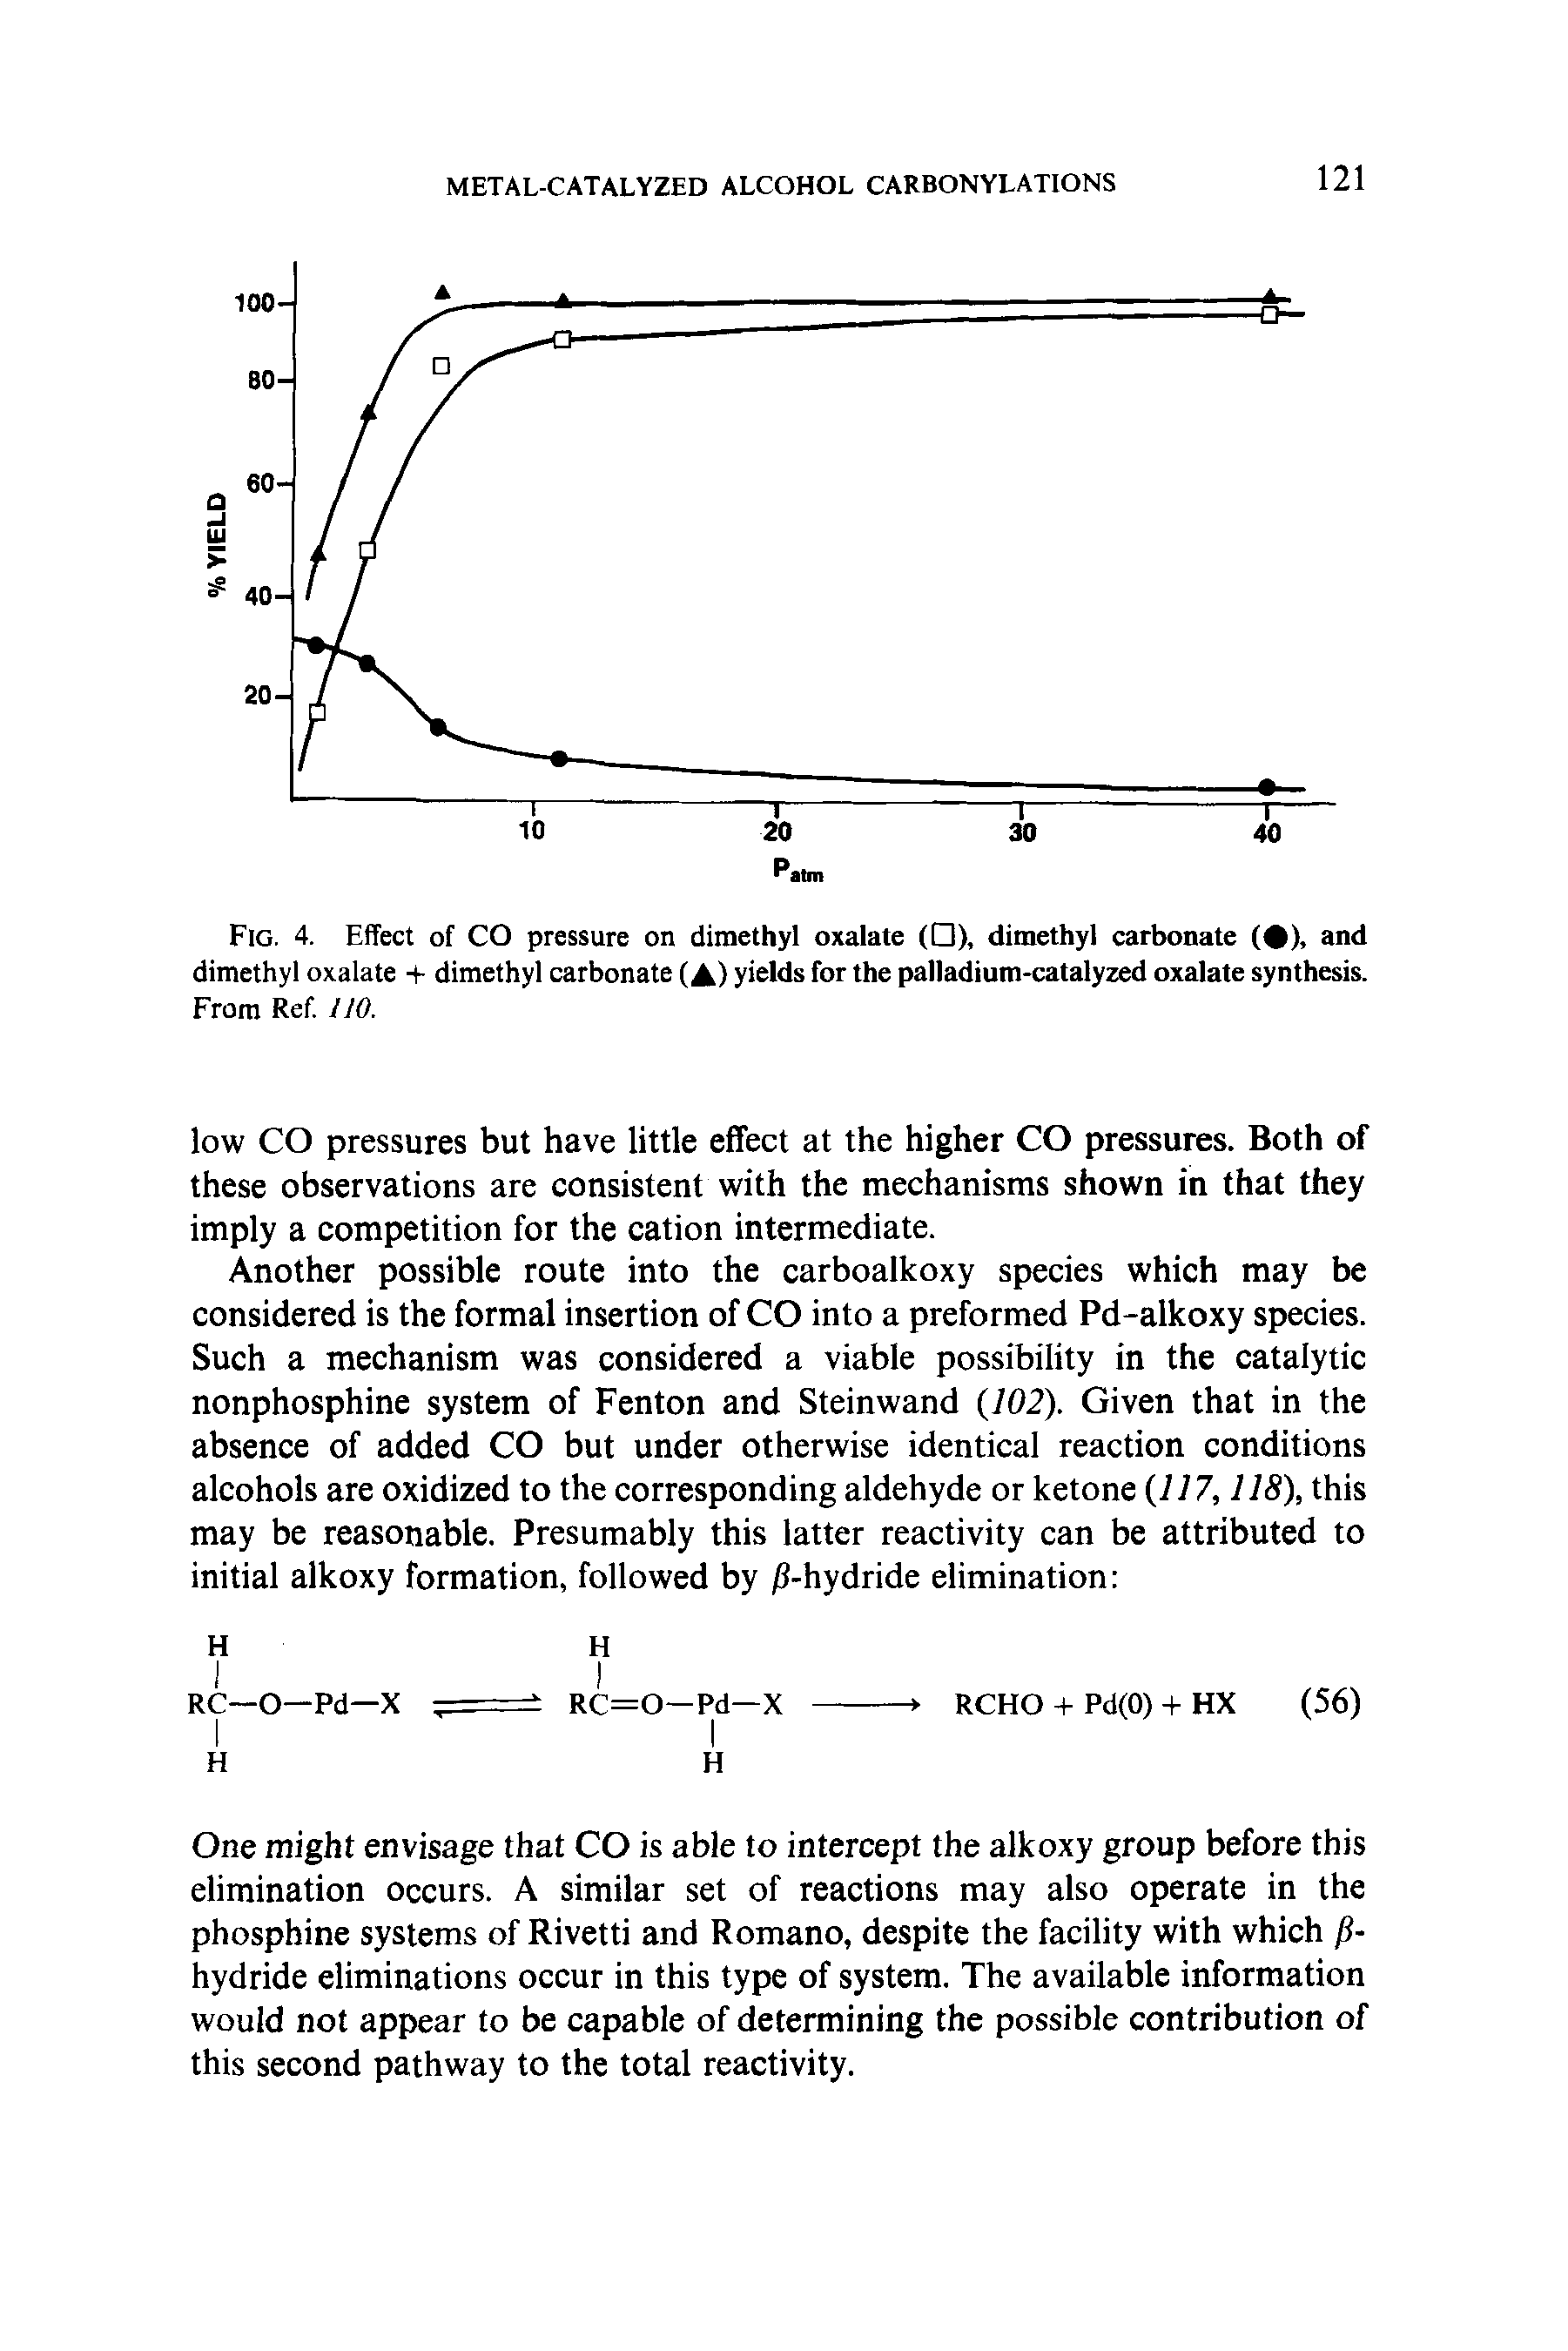 Fig. 4. Effect of CO pressure on dimethyl oxalate ( ), dimethyl carbonate ( ), and dimethyl oxalate + dimethyl carbonate (A) yields for the palladium-catalyzed oxalate synthesis. From Ref. 110.